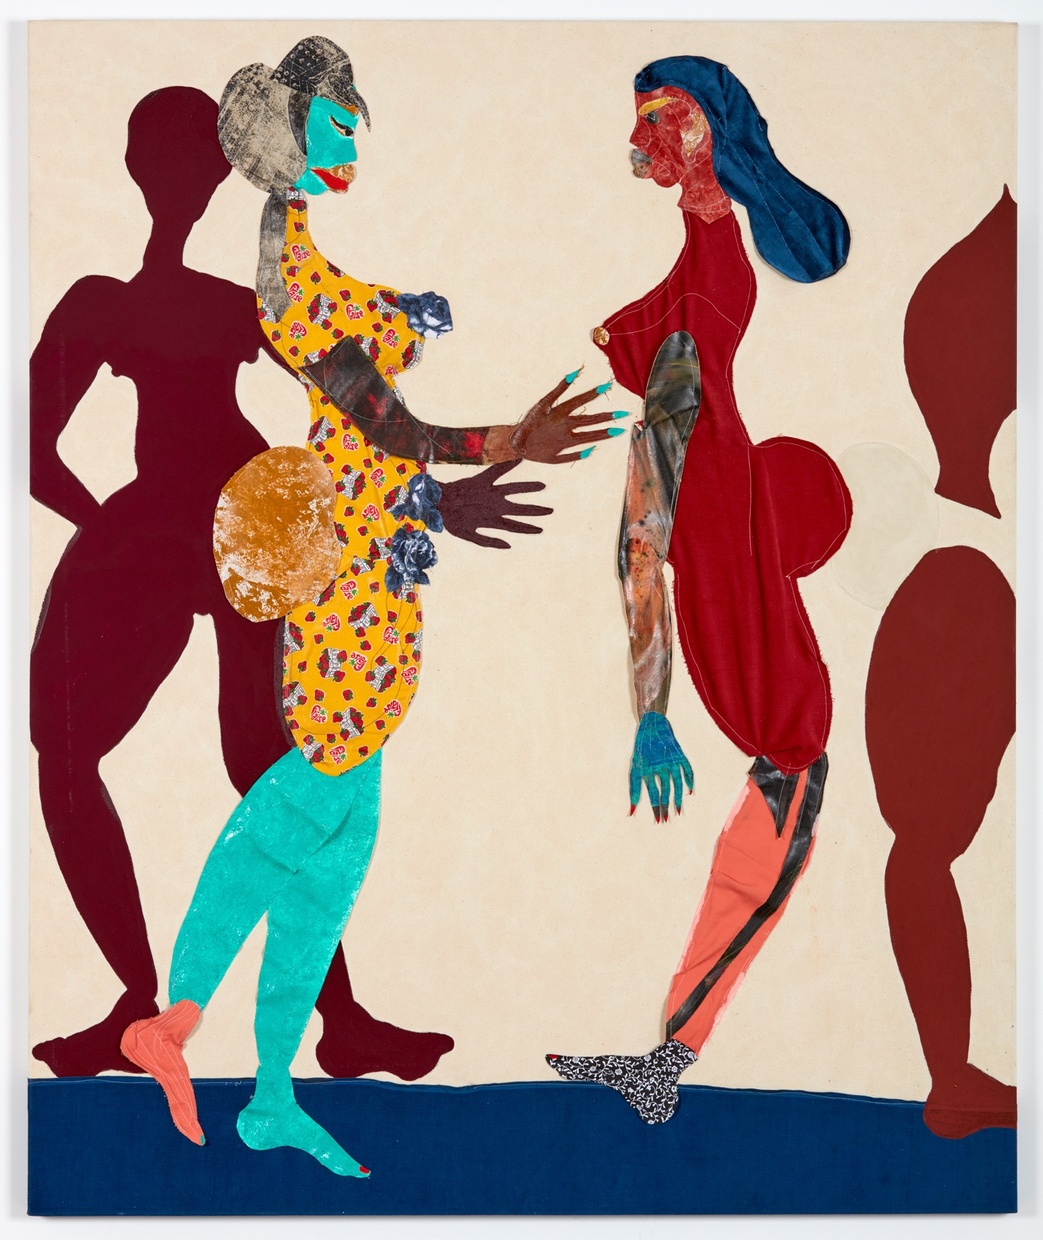 Two abstract, colorful, voluptuous female figures made of different patterned material stand facing each other. Two brown, female shapes are in the background.